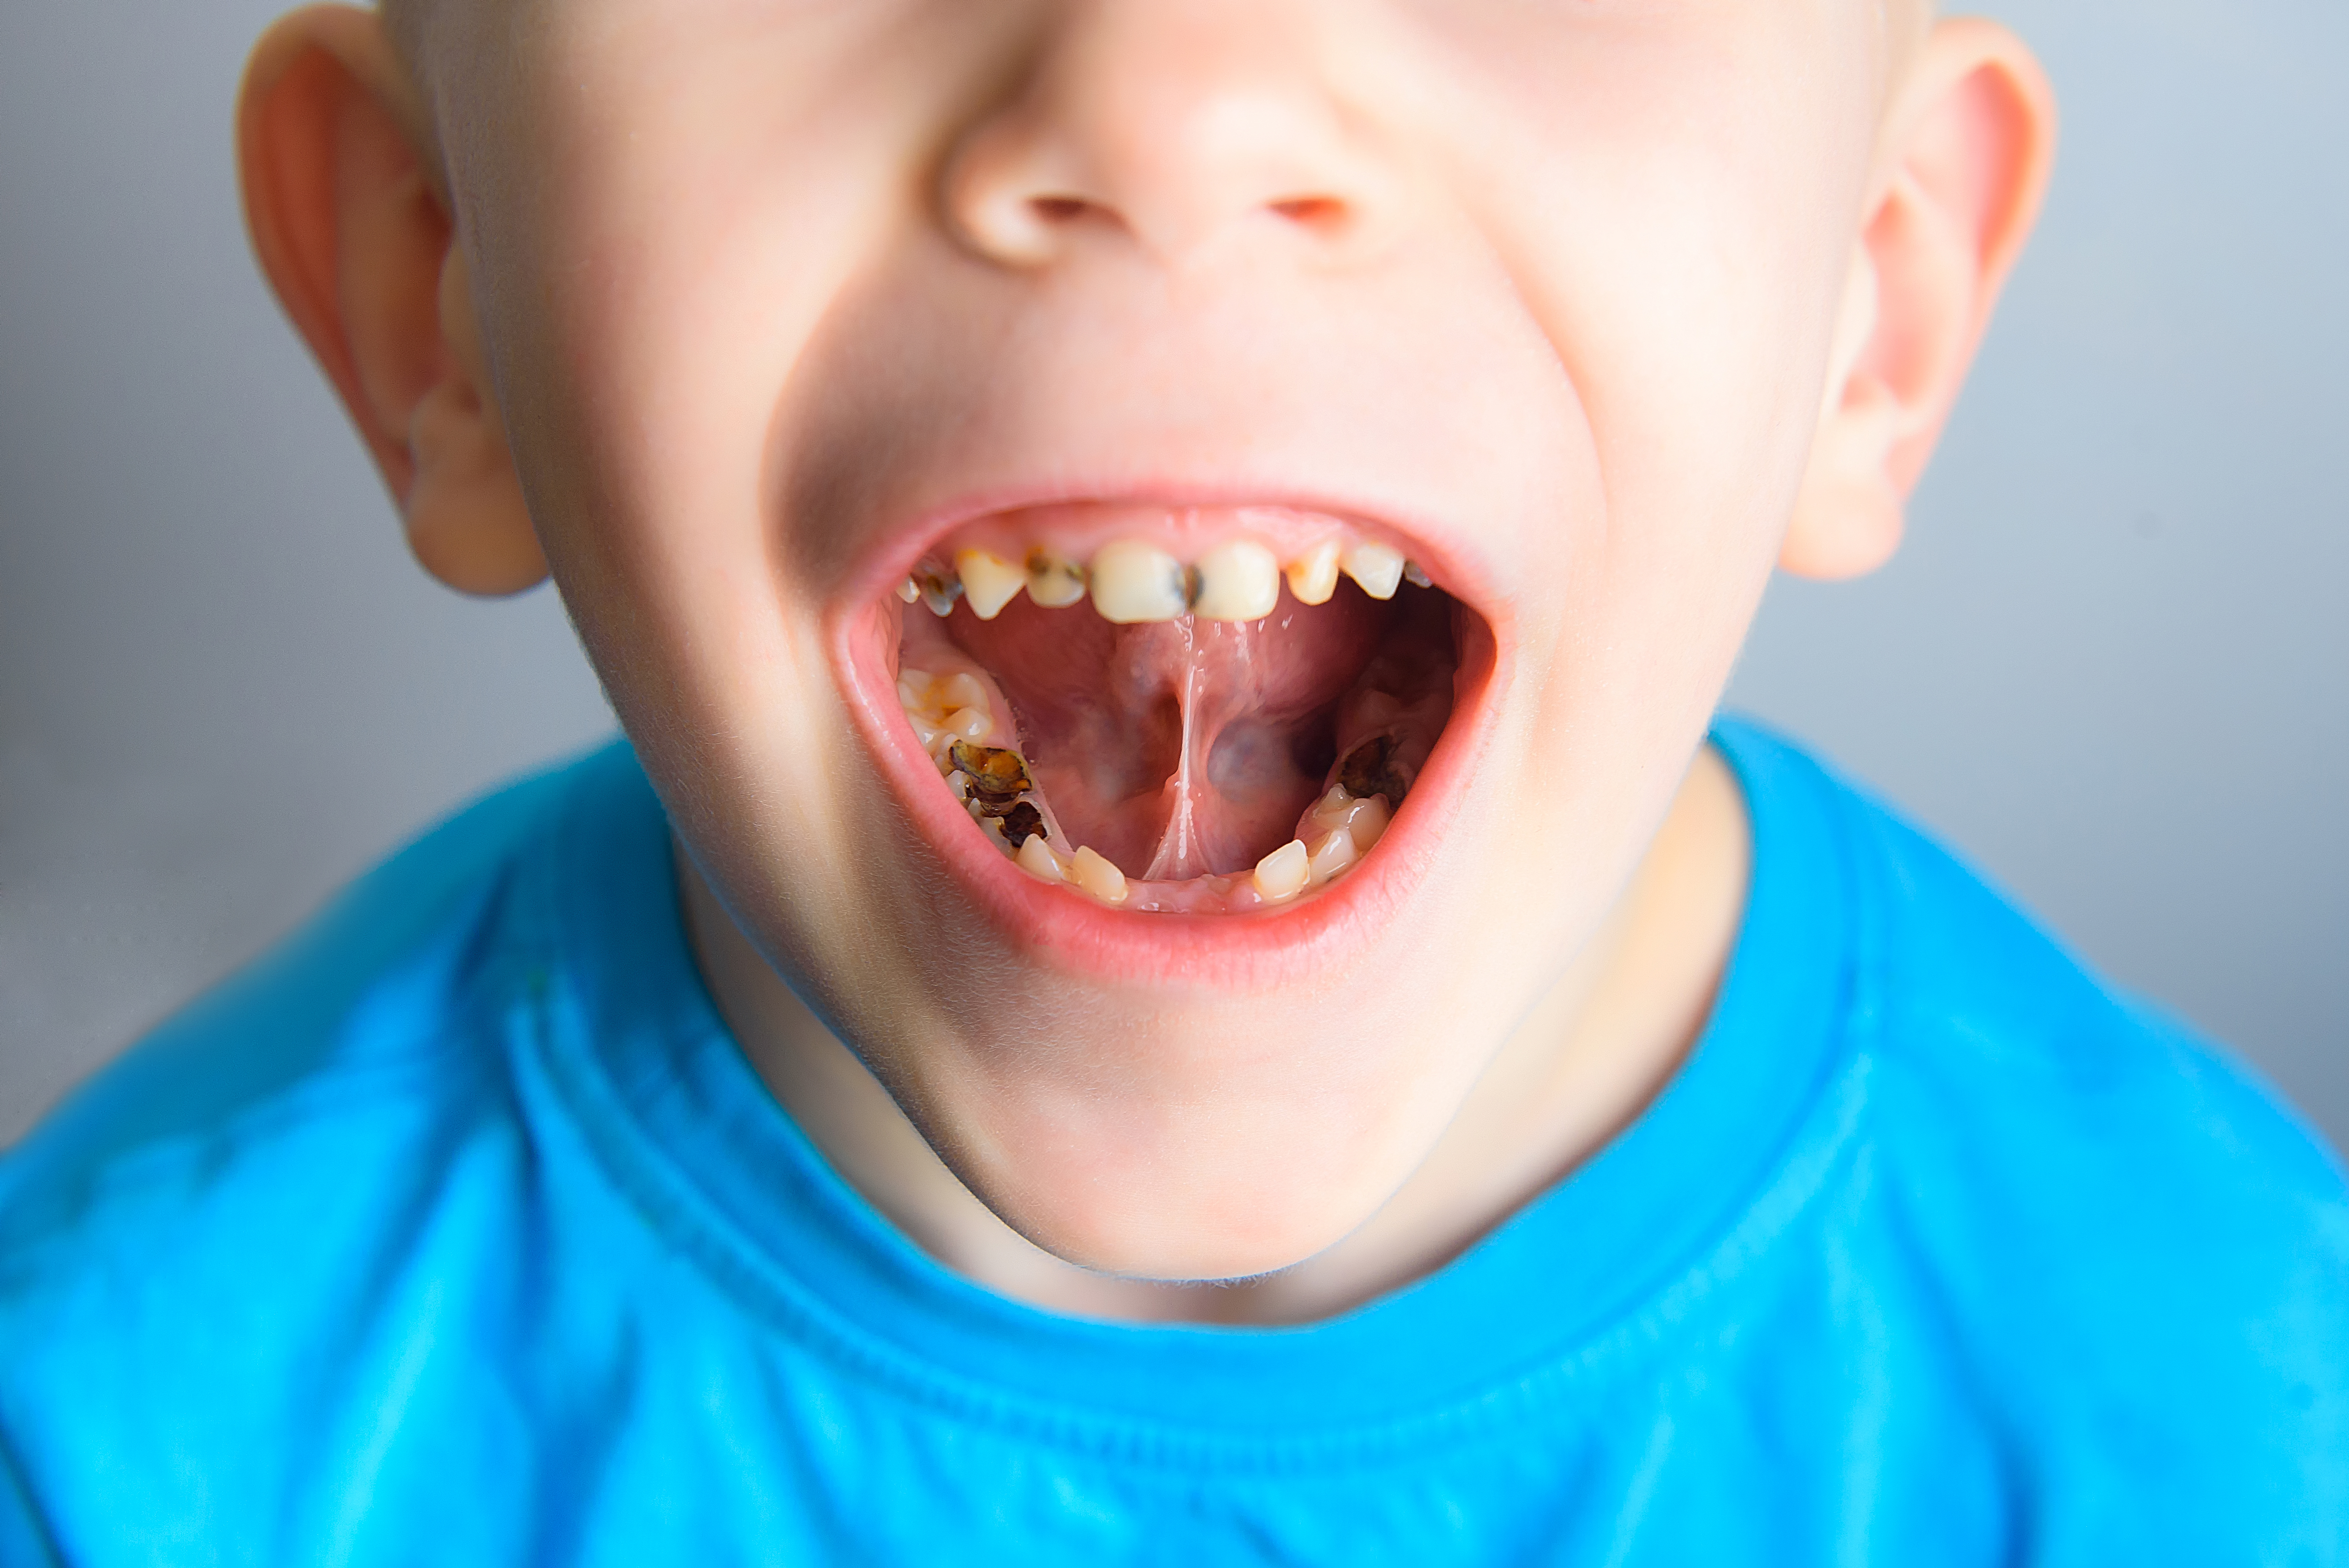 Tooth decay is another risk factor that comes with kids' consumption of energy drinks